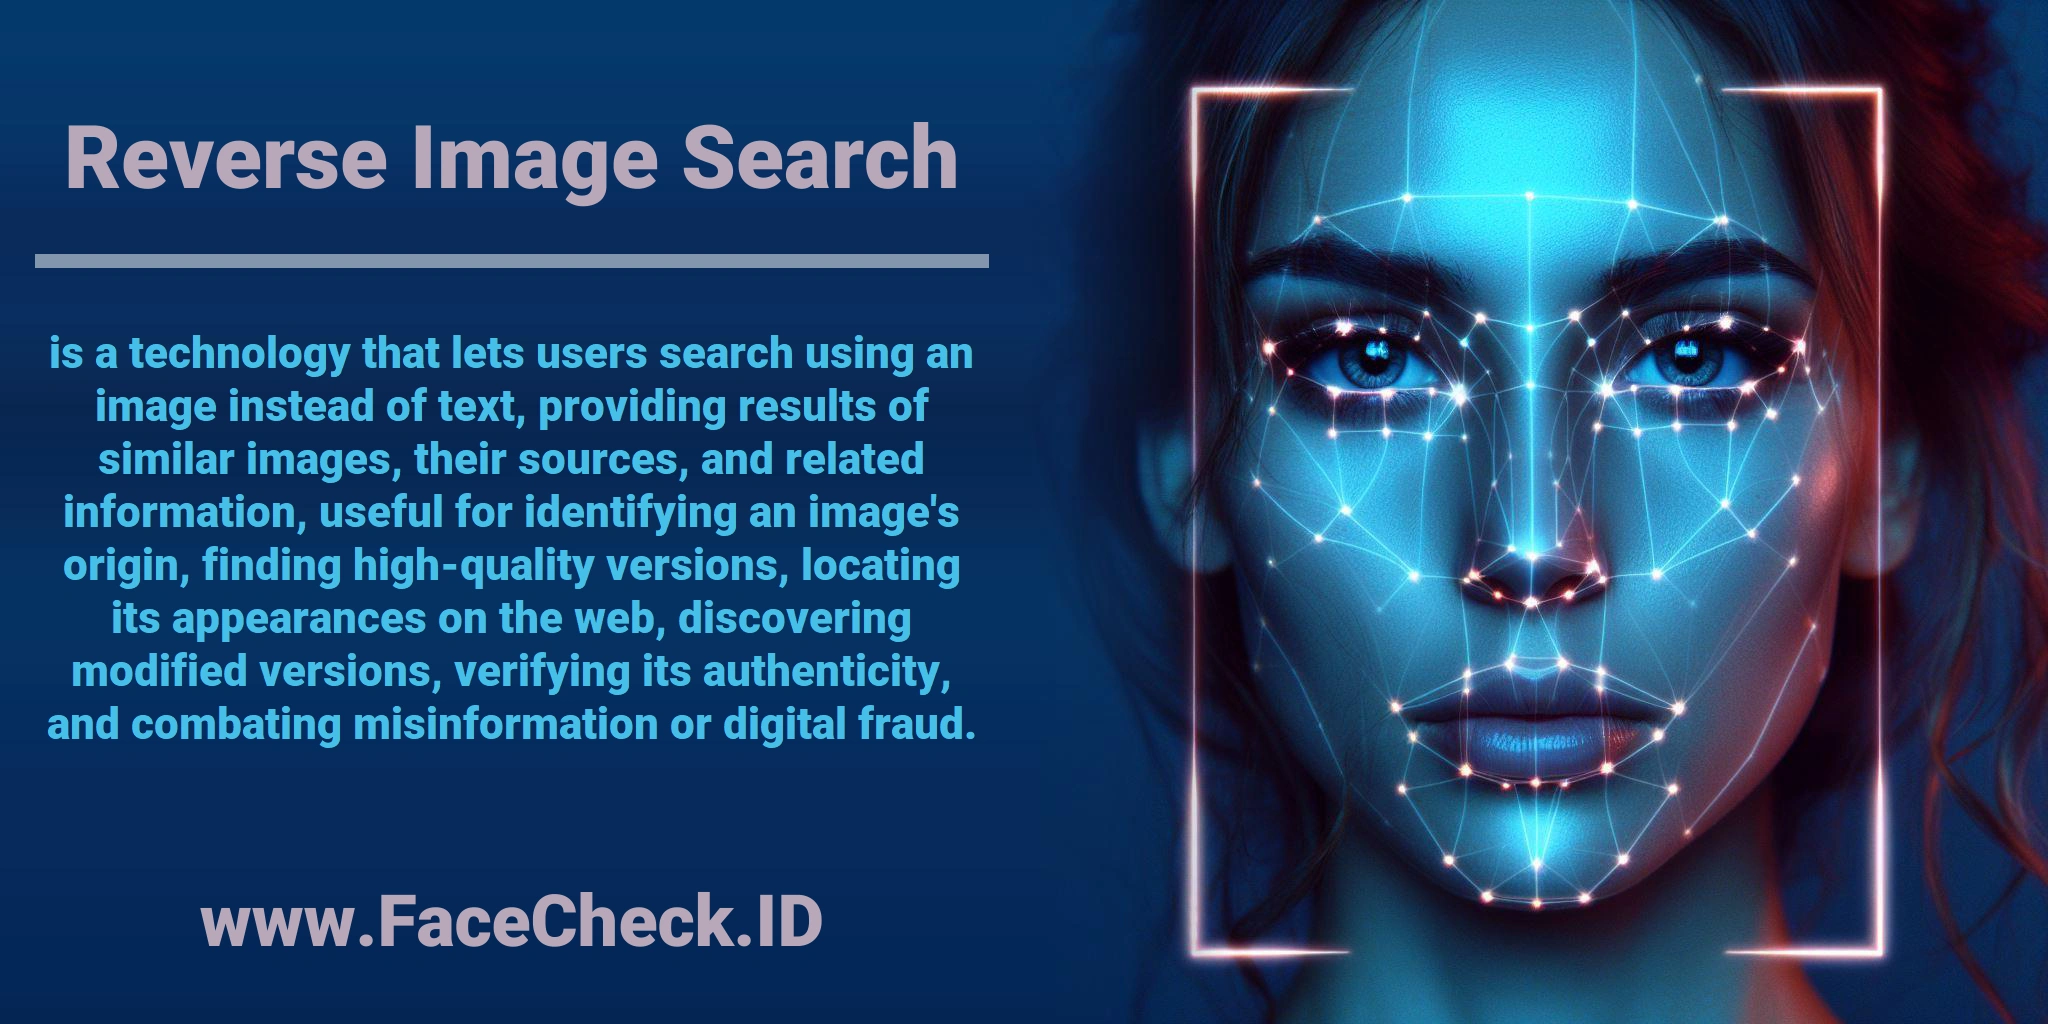 <b>Reverse Image Search</b> is a technology that lets users search using an image instead of text, providing results of similar images, their sources, and related information, useful for identifying an image's origin, finding high-quality versions, locating its appearances on the web, discovering modified versions, verifying its authenticity, and combating misinformation or digital fraud.